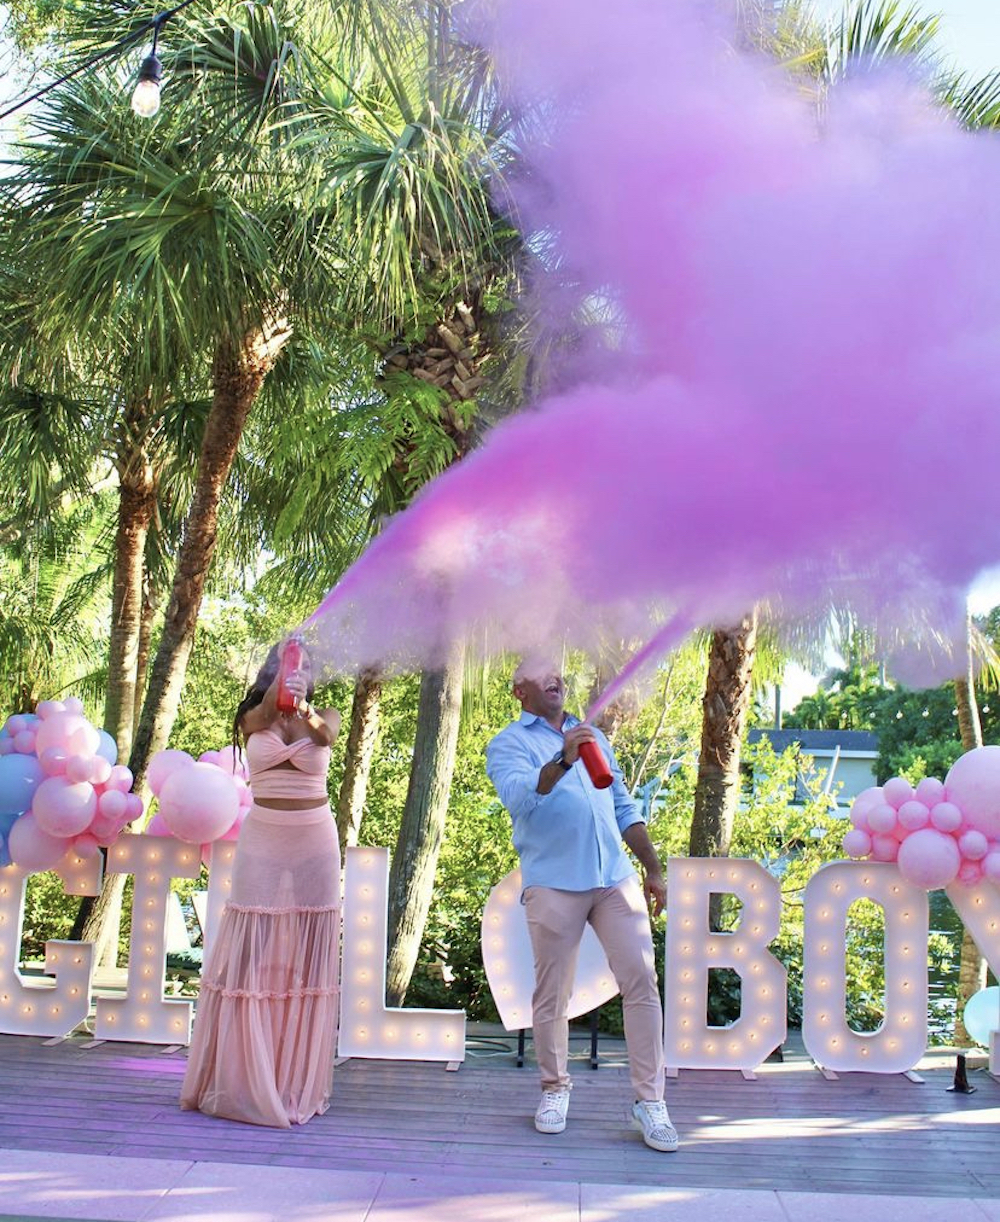 Cute Gender Reveal Ideas to Inspire Your Party Planning